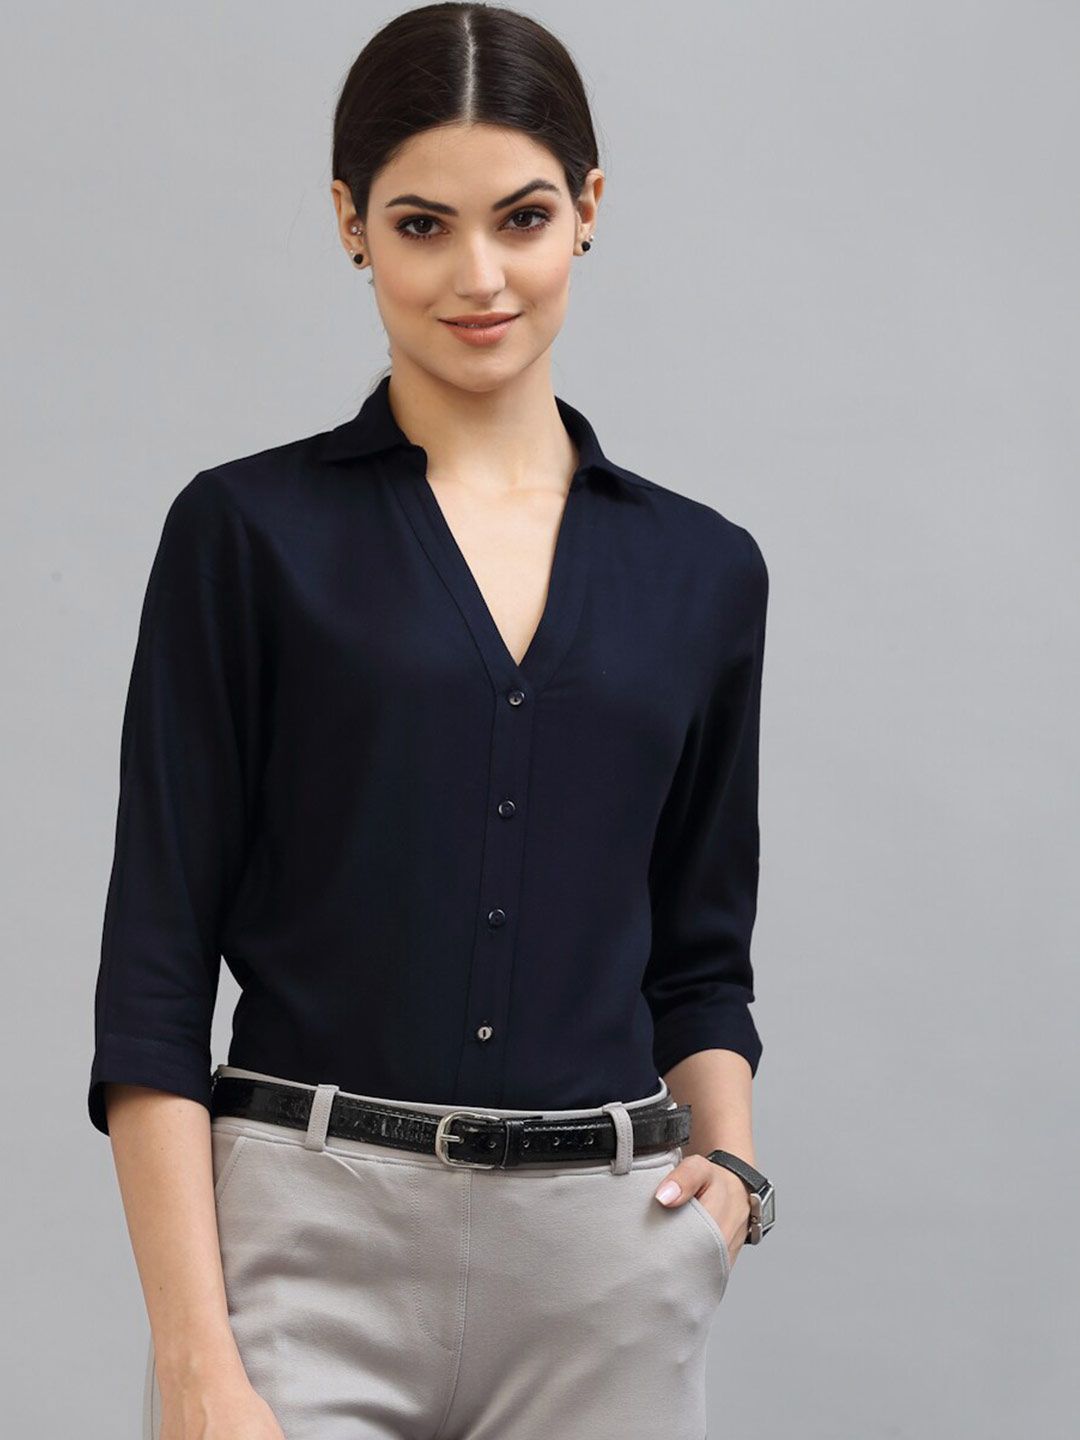 Style Quotient Women Navy Blue Formal Shirt Price in India